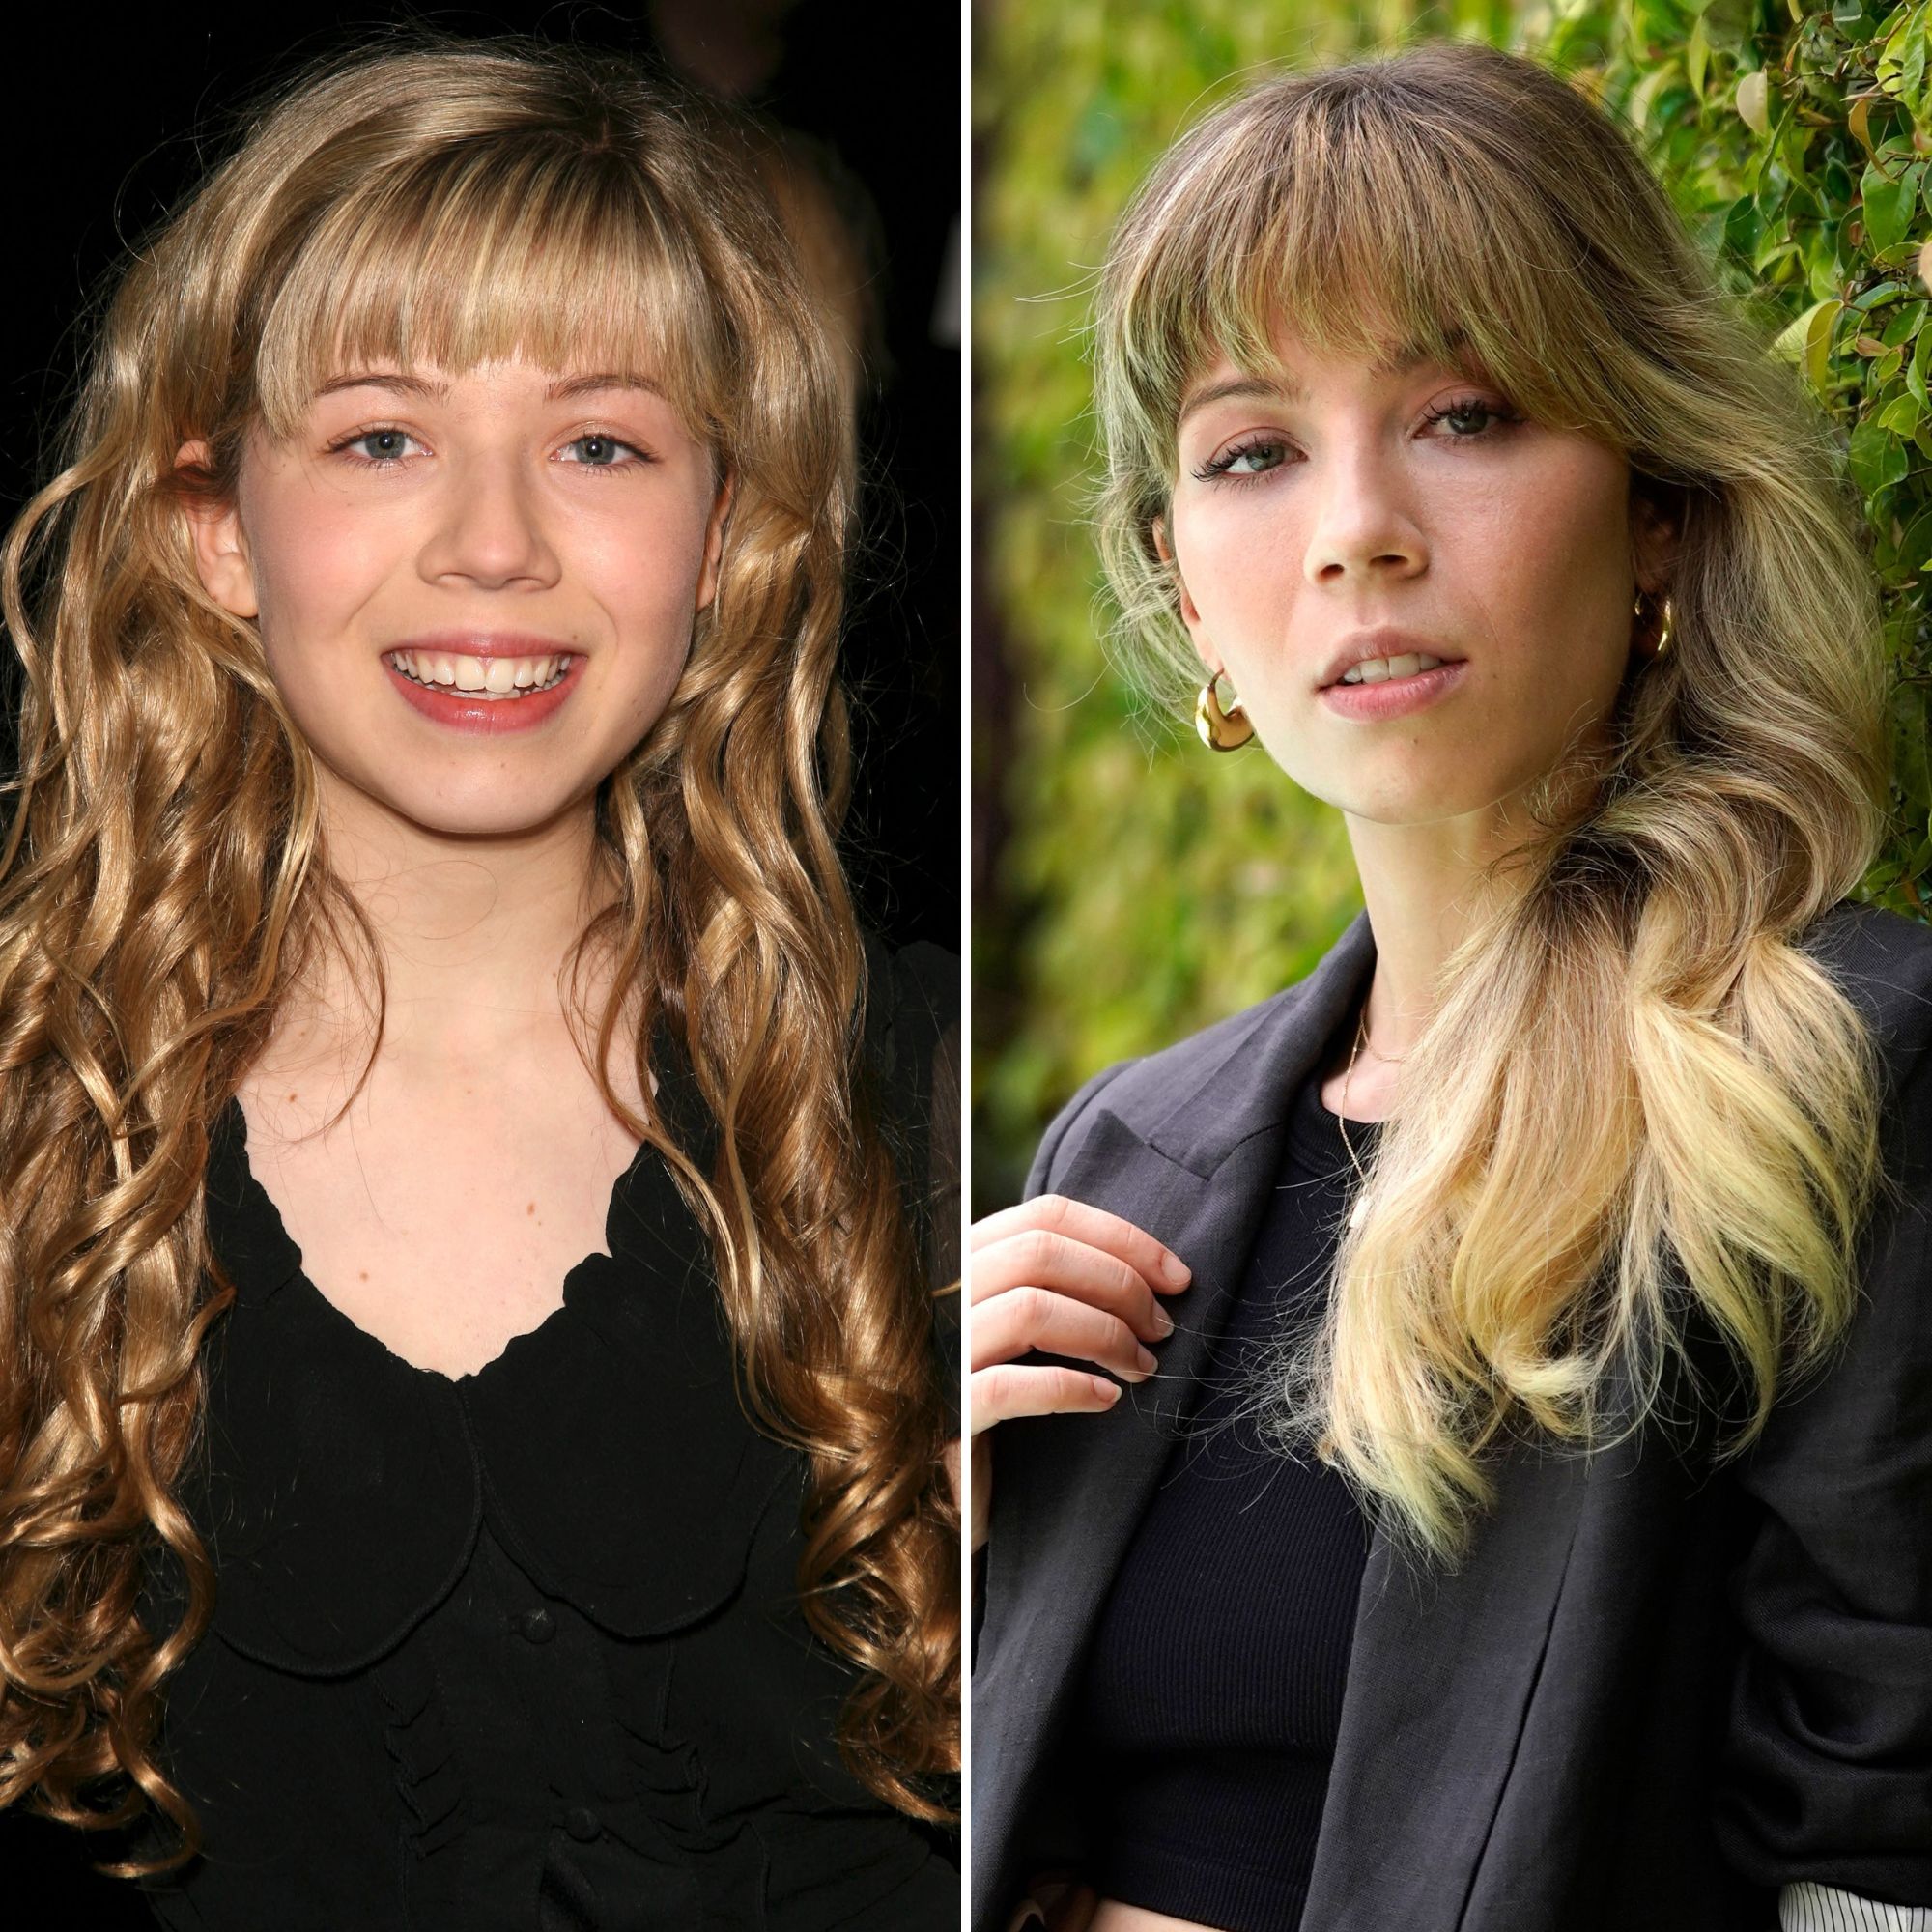 Jennette Mccurdy Hardcore Porn - Jennette McCurdy Transformation From 'iCarly' to Now: Photos